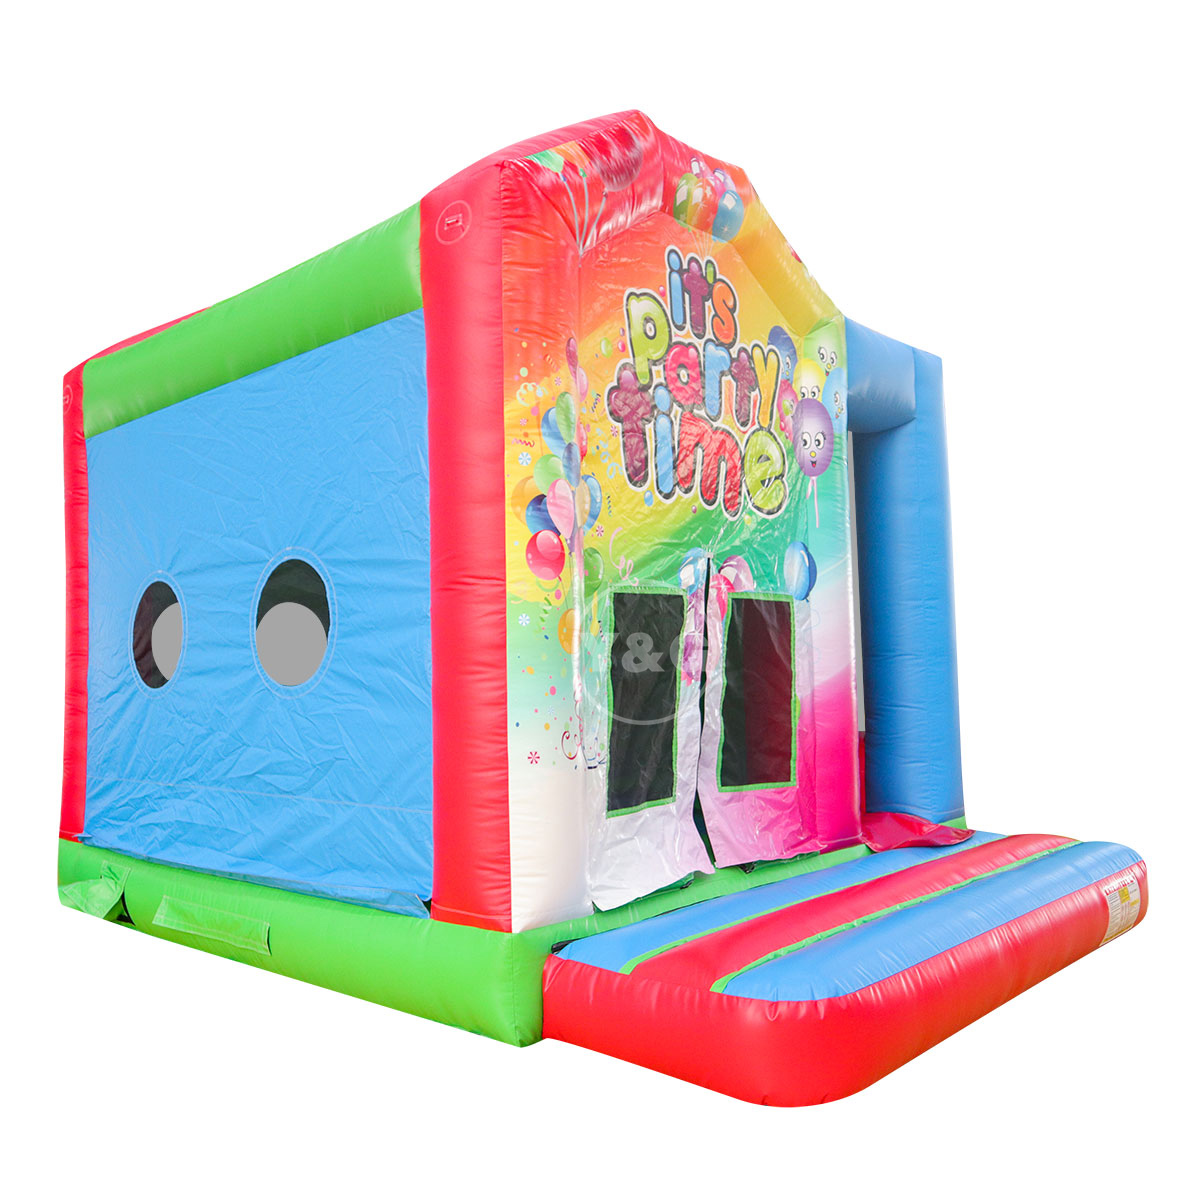 Inflatable Party Bounce HouseYG-146